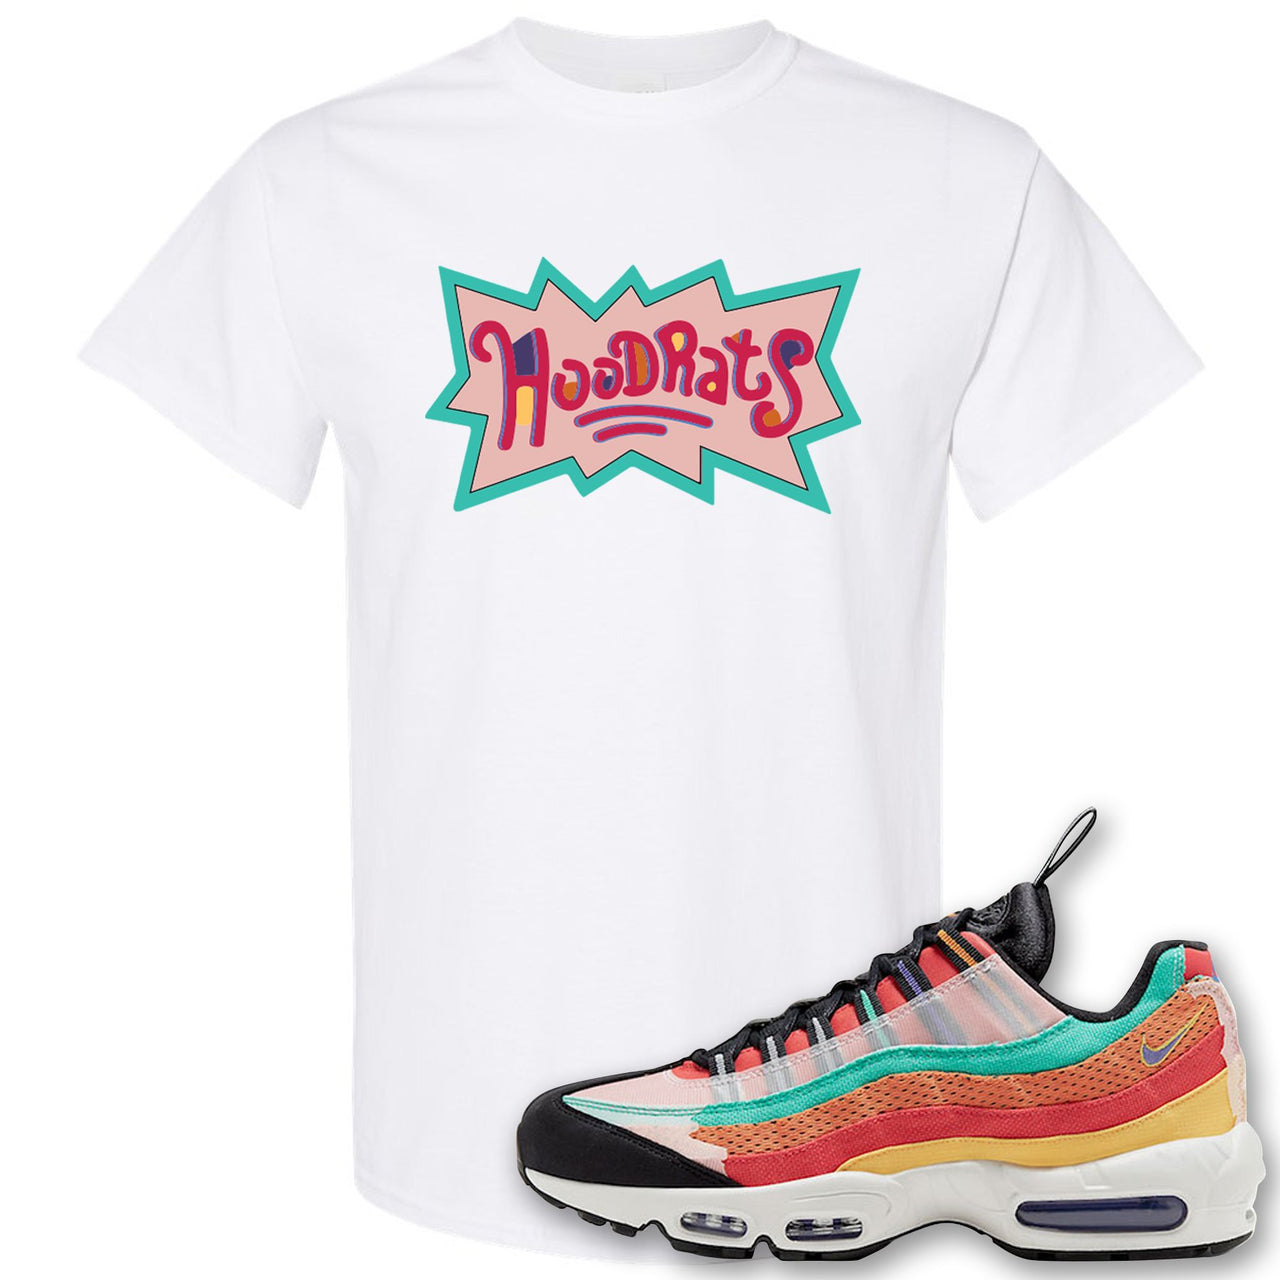 Air Max 95 Black History Month Sneaker White T Shirt | Tees to match Nike Air Max 95 Black History Month Shoes | Hood Rats